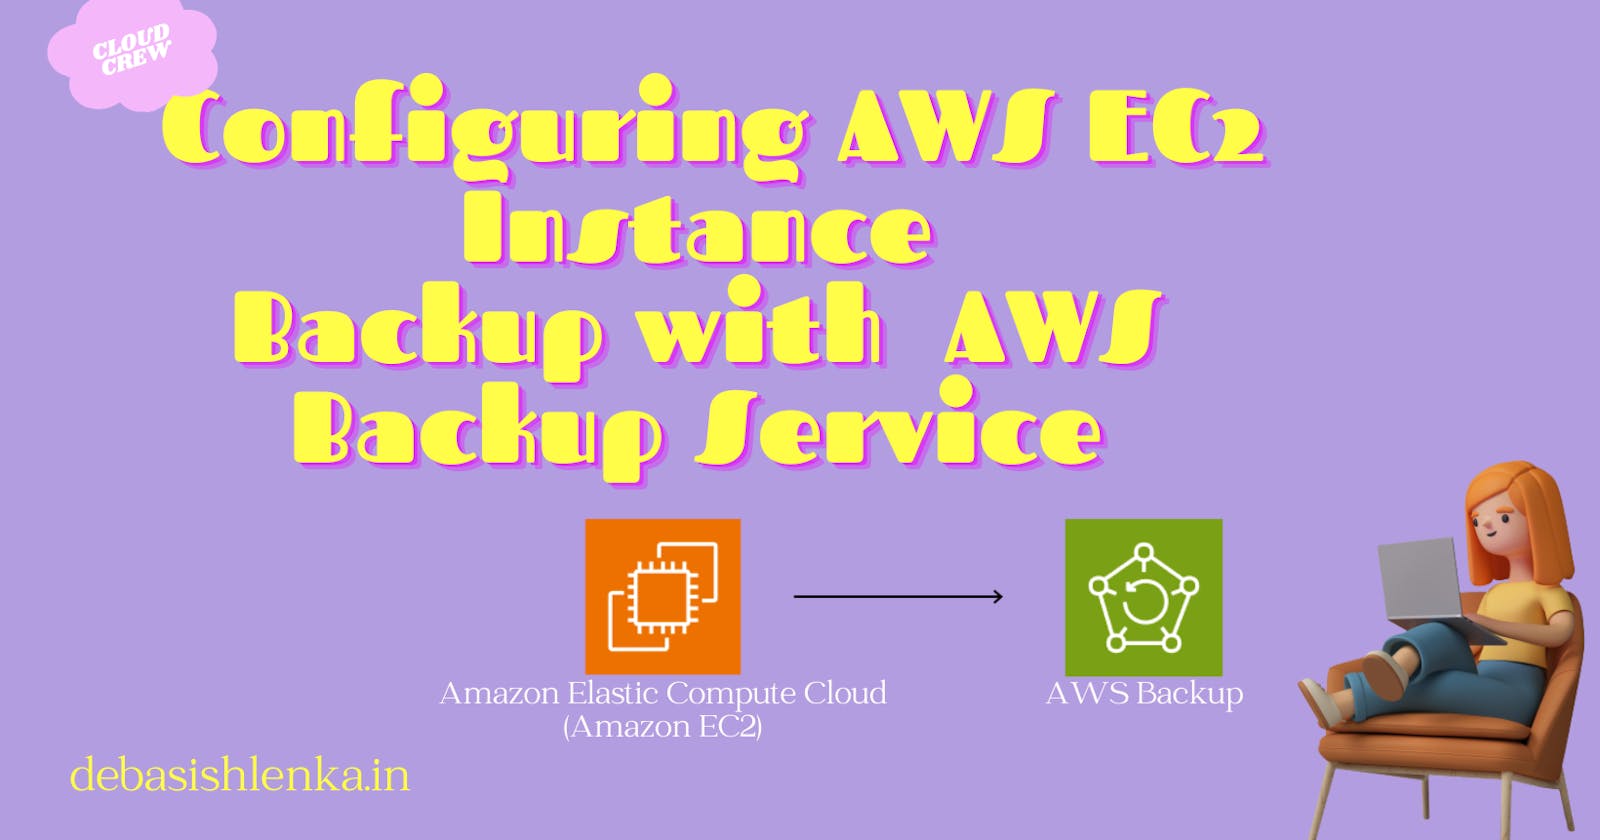 How to configure Amazon EC2 Instances Backup with AWS Backup Service 🚀⛅